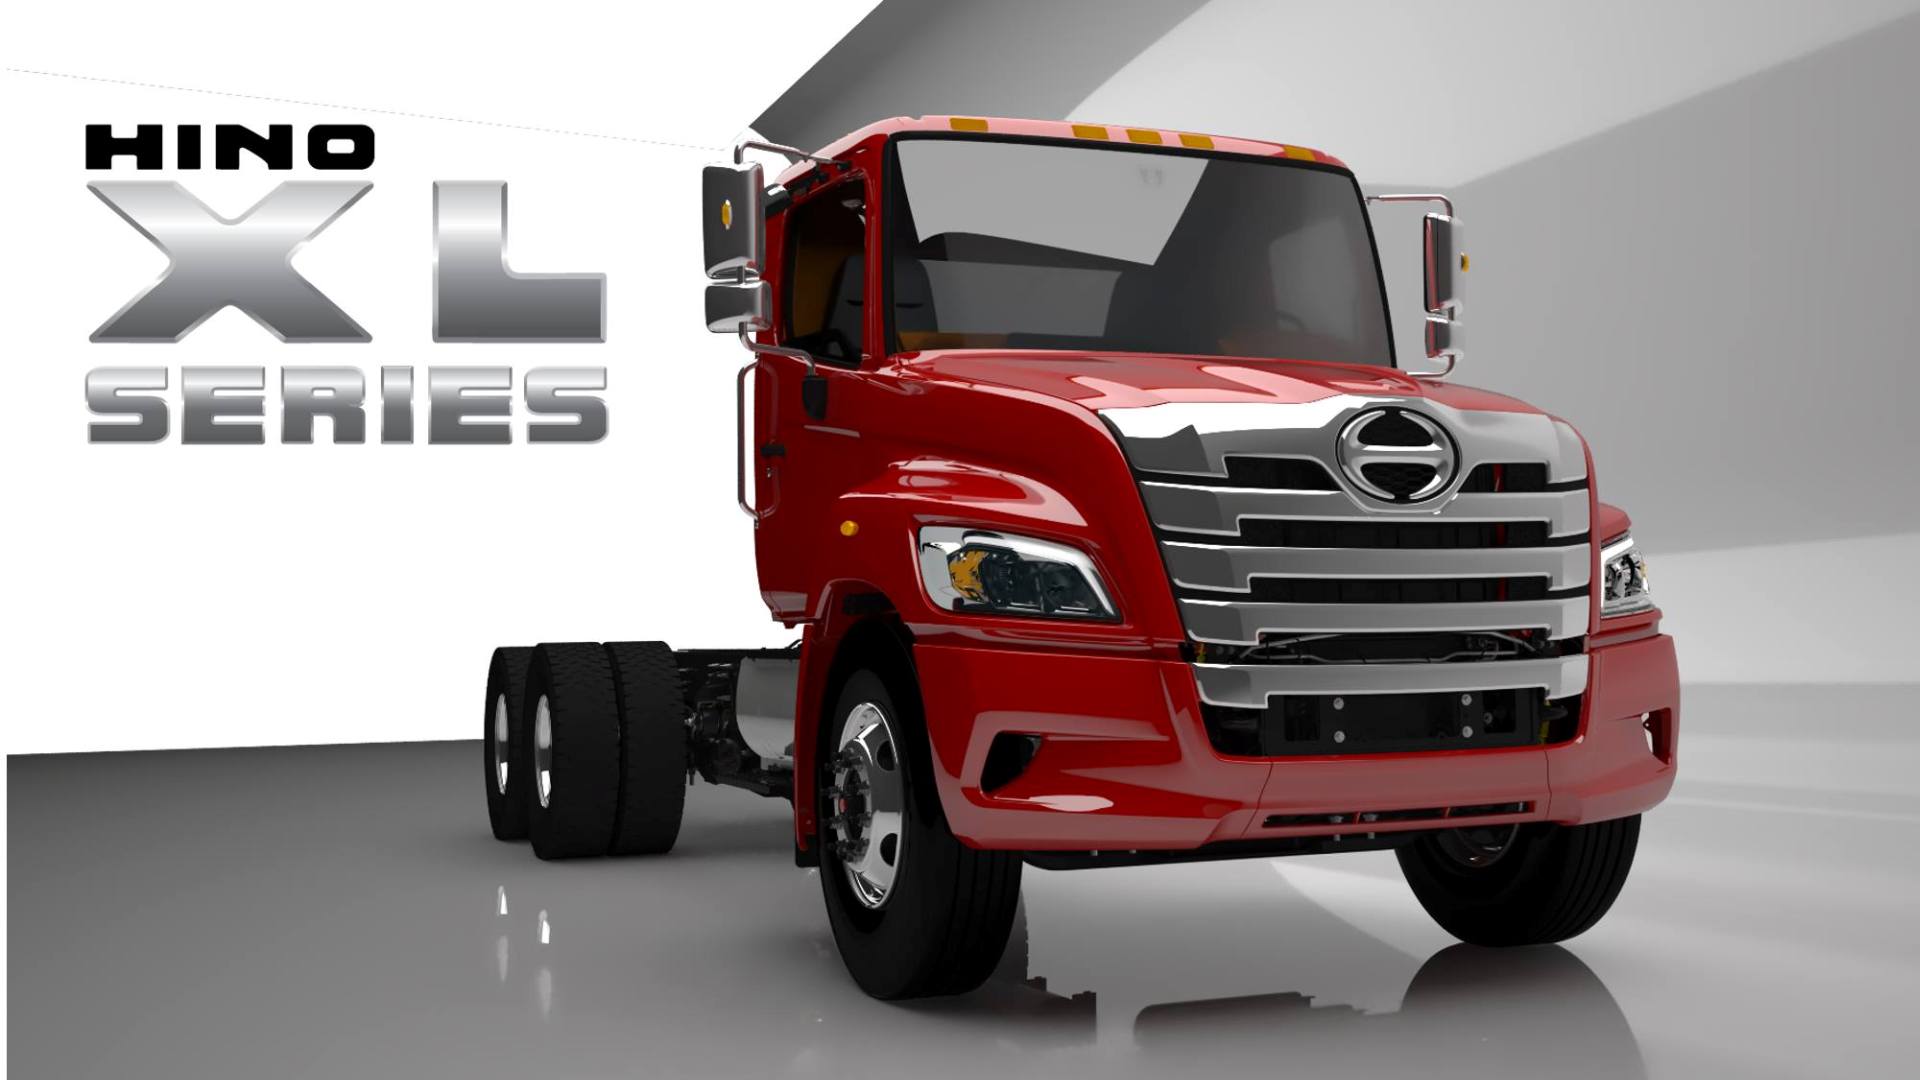 You are currently viewing HINO XL7 And XL8 Series Trucks